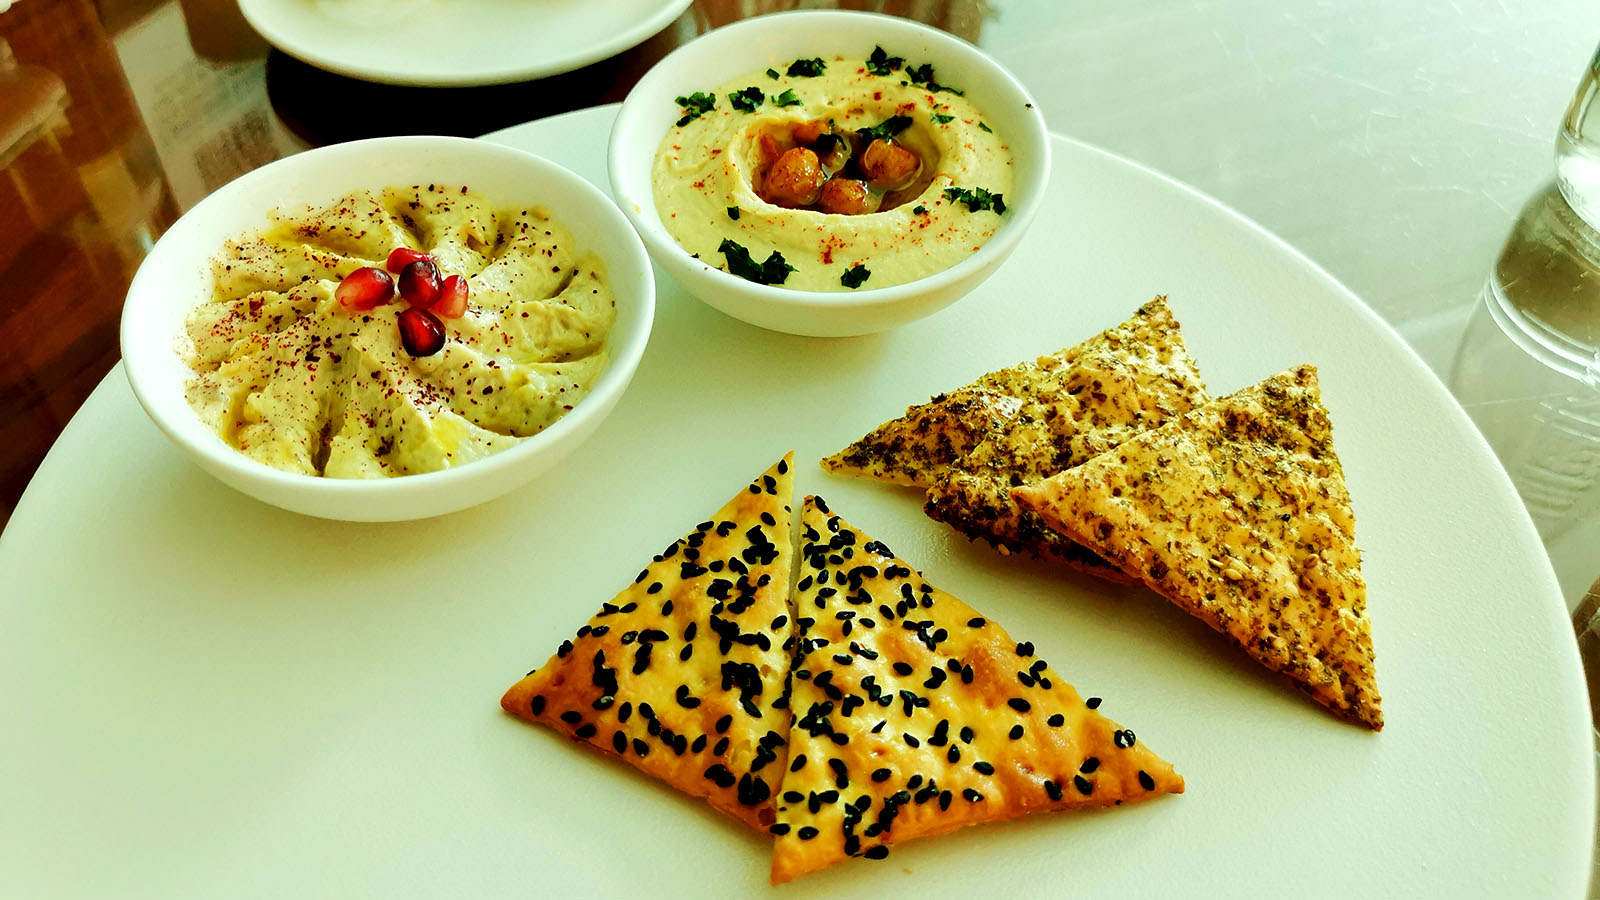 Lavosh and hummus in the Emirates First Class Lounge in Dubai Concourse A